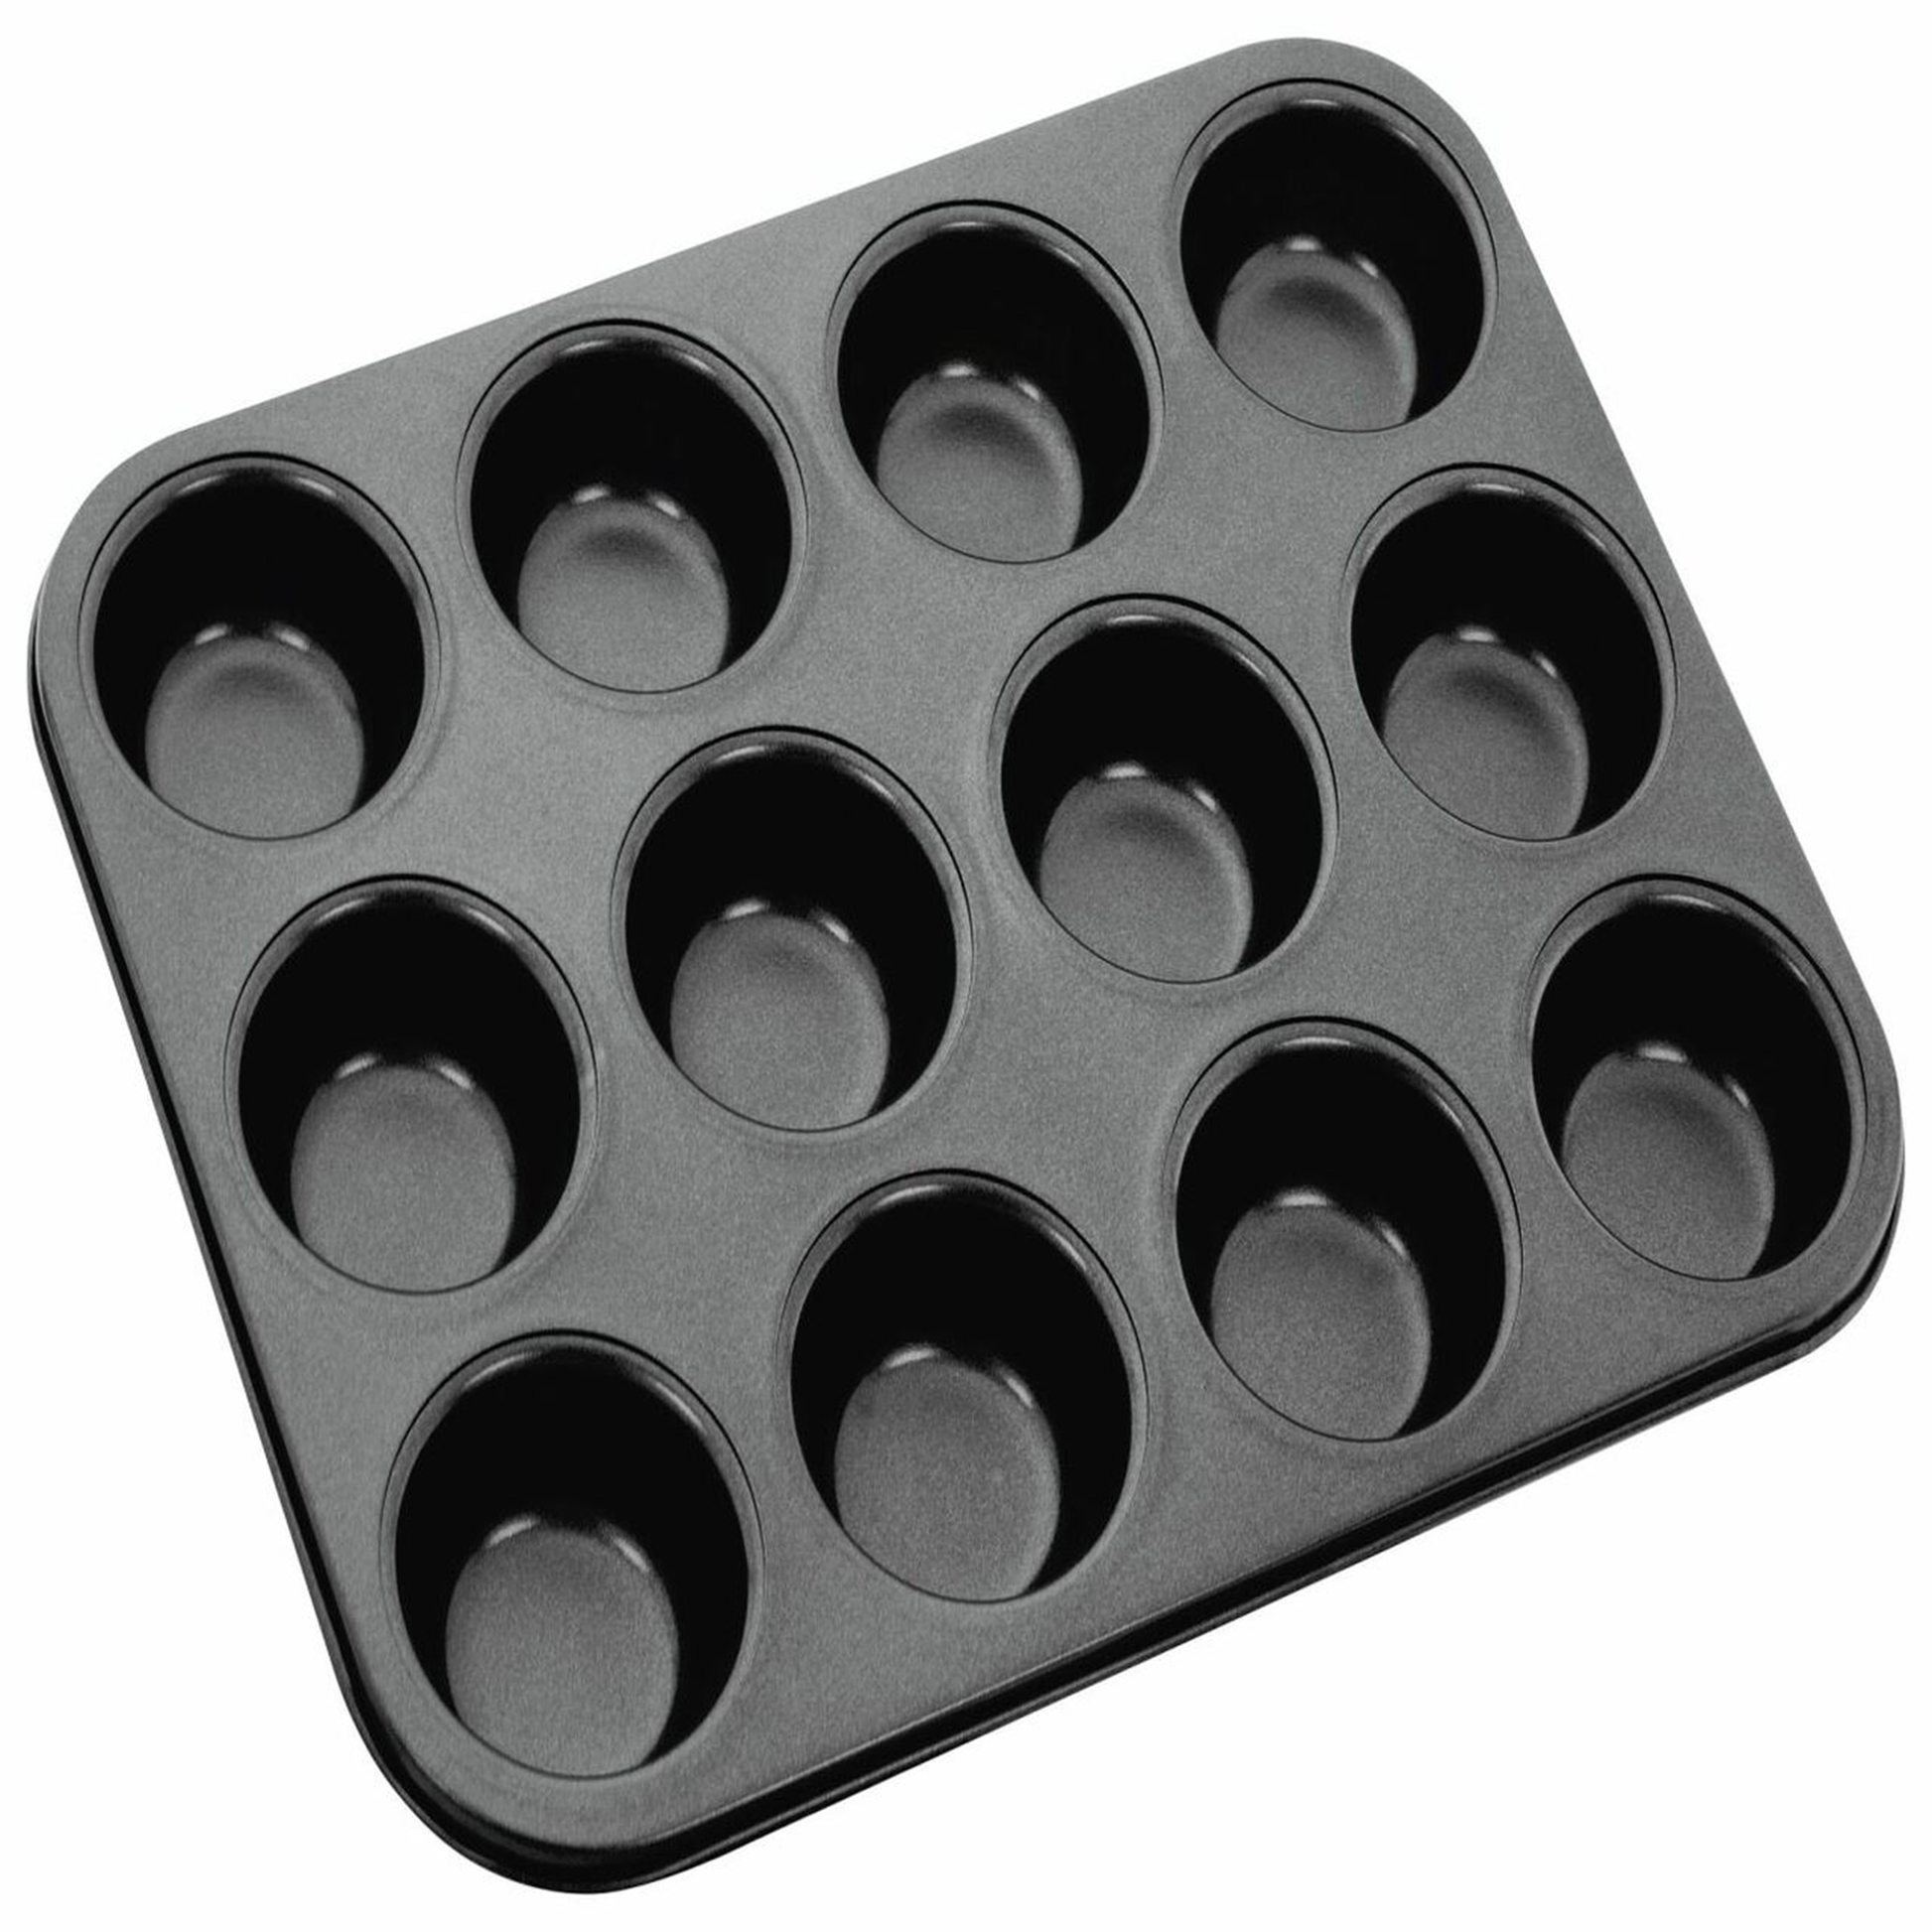 the cup cake/muffin tin with 12 compartments